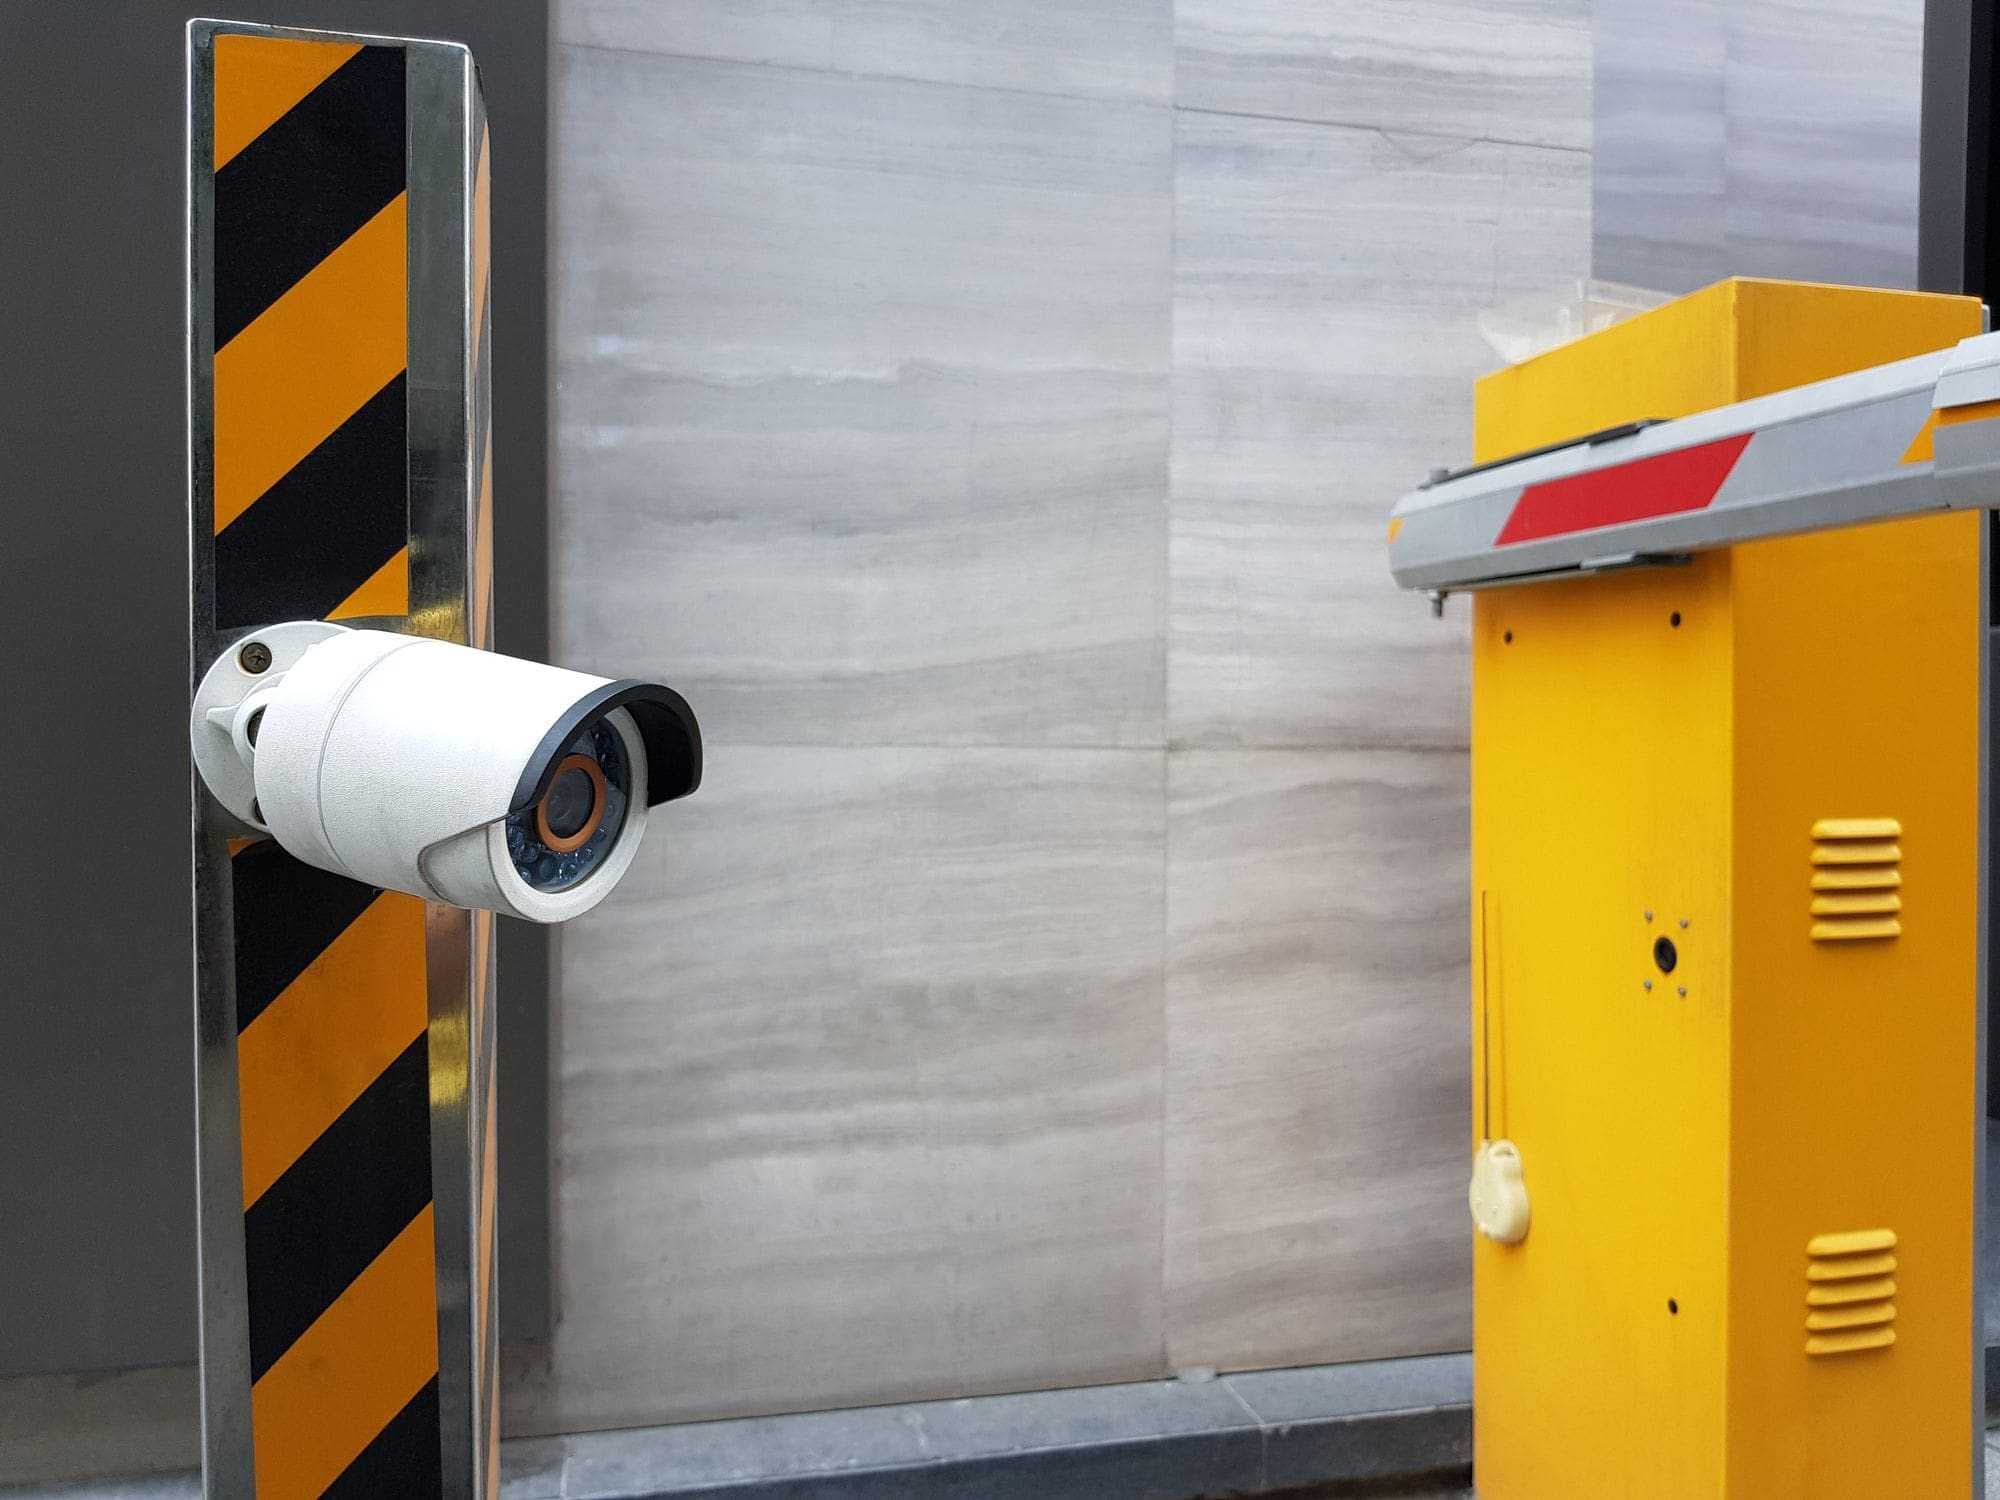 CCTV security camera at commercial automatic gate entrance